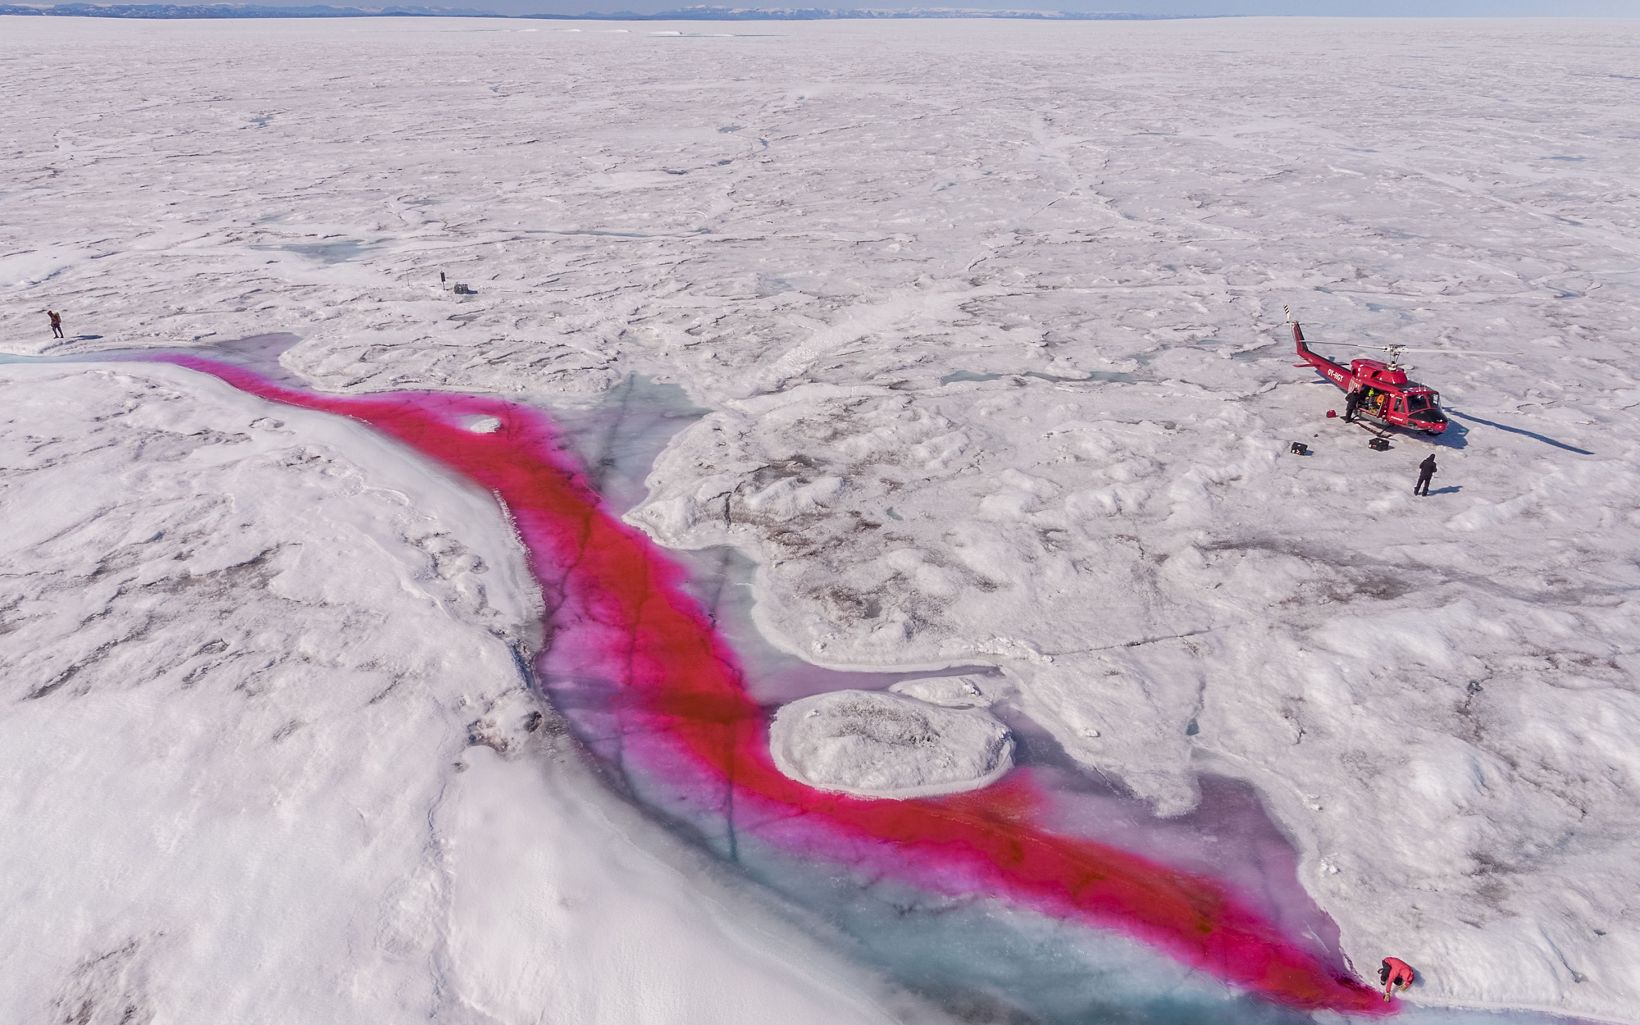 A red dye shows water flow dynamics on an ice sheet in Greenland